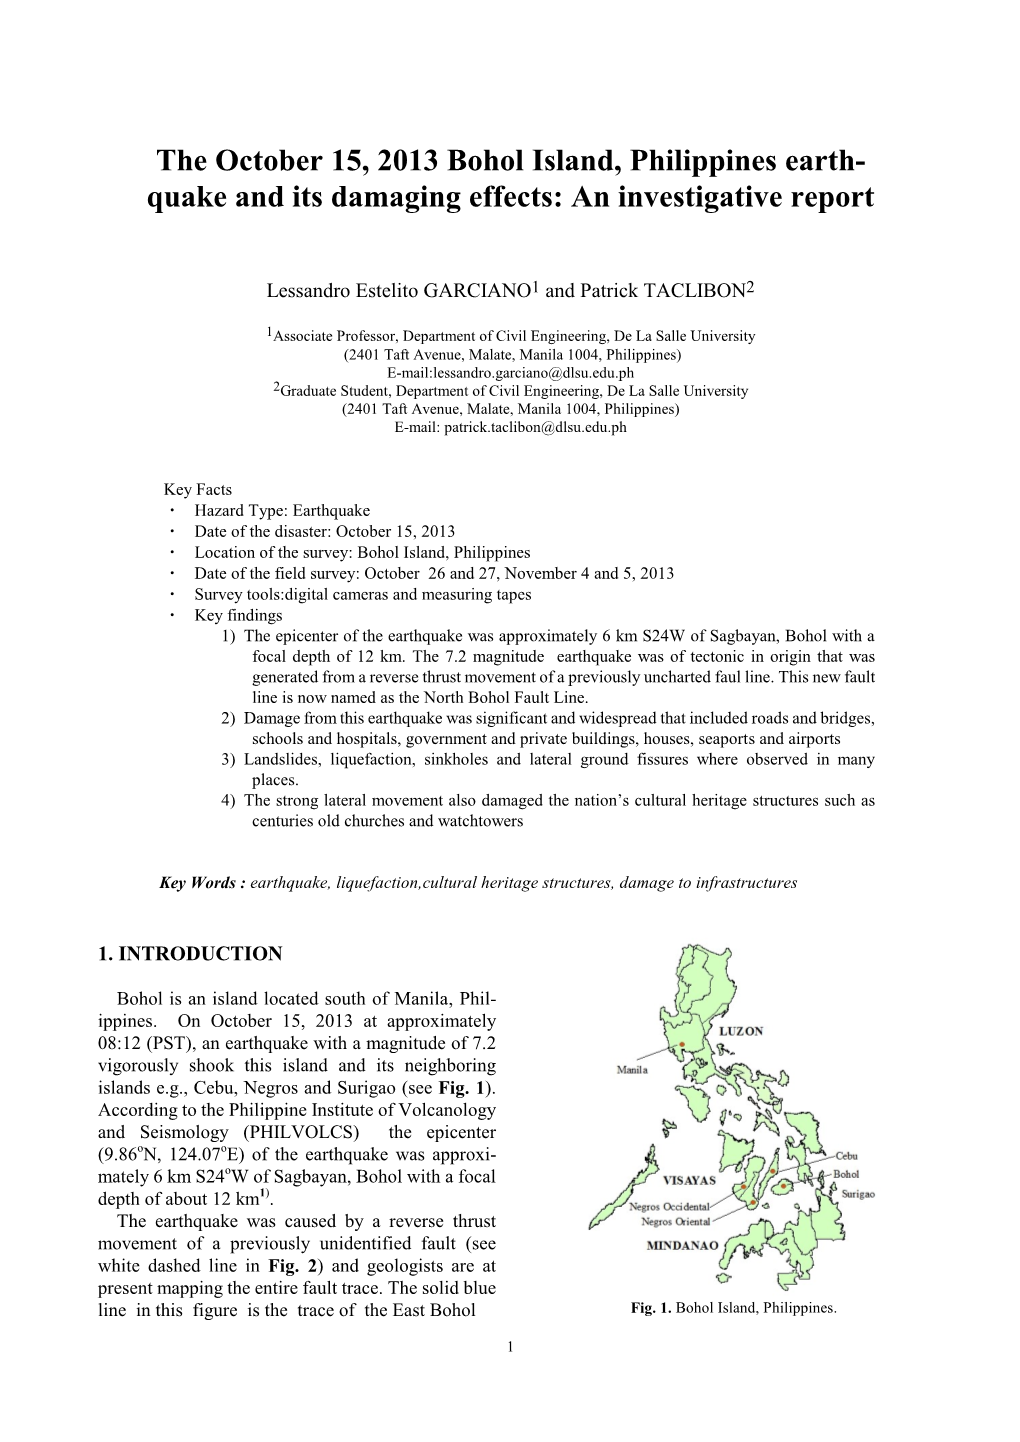 The October 15, 2013 Bohol Island, Philippines Earth- Quake and Its Damaging Effects: an Investigative Report